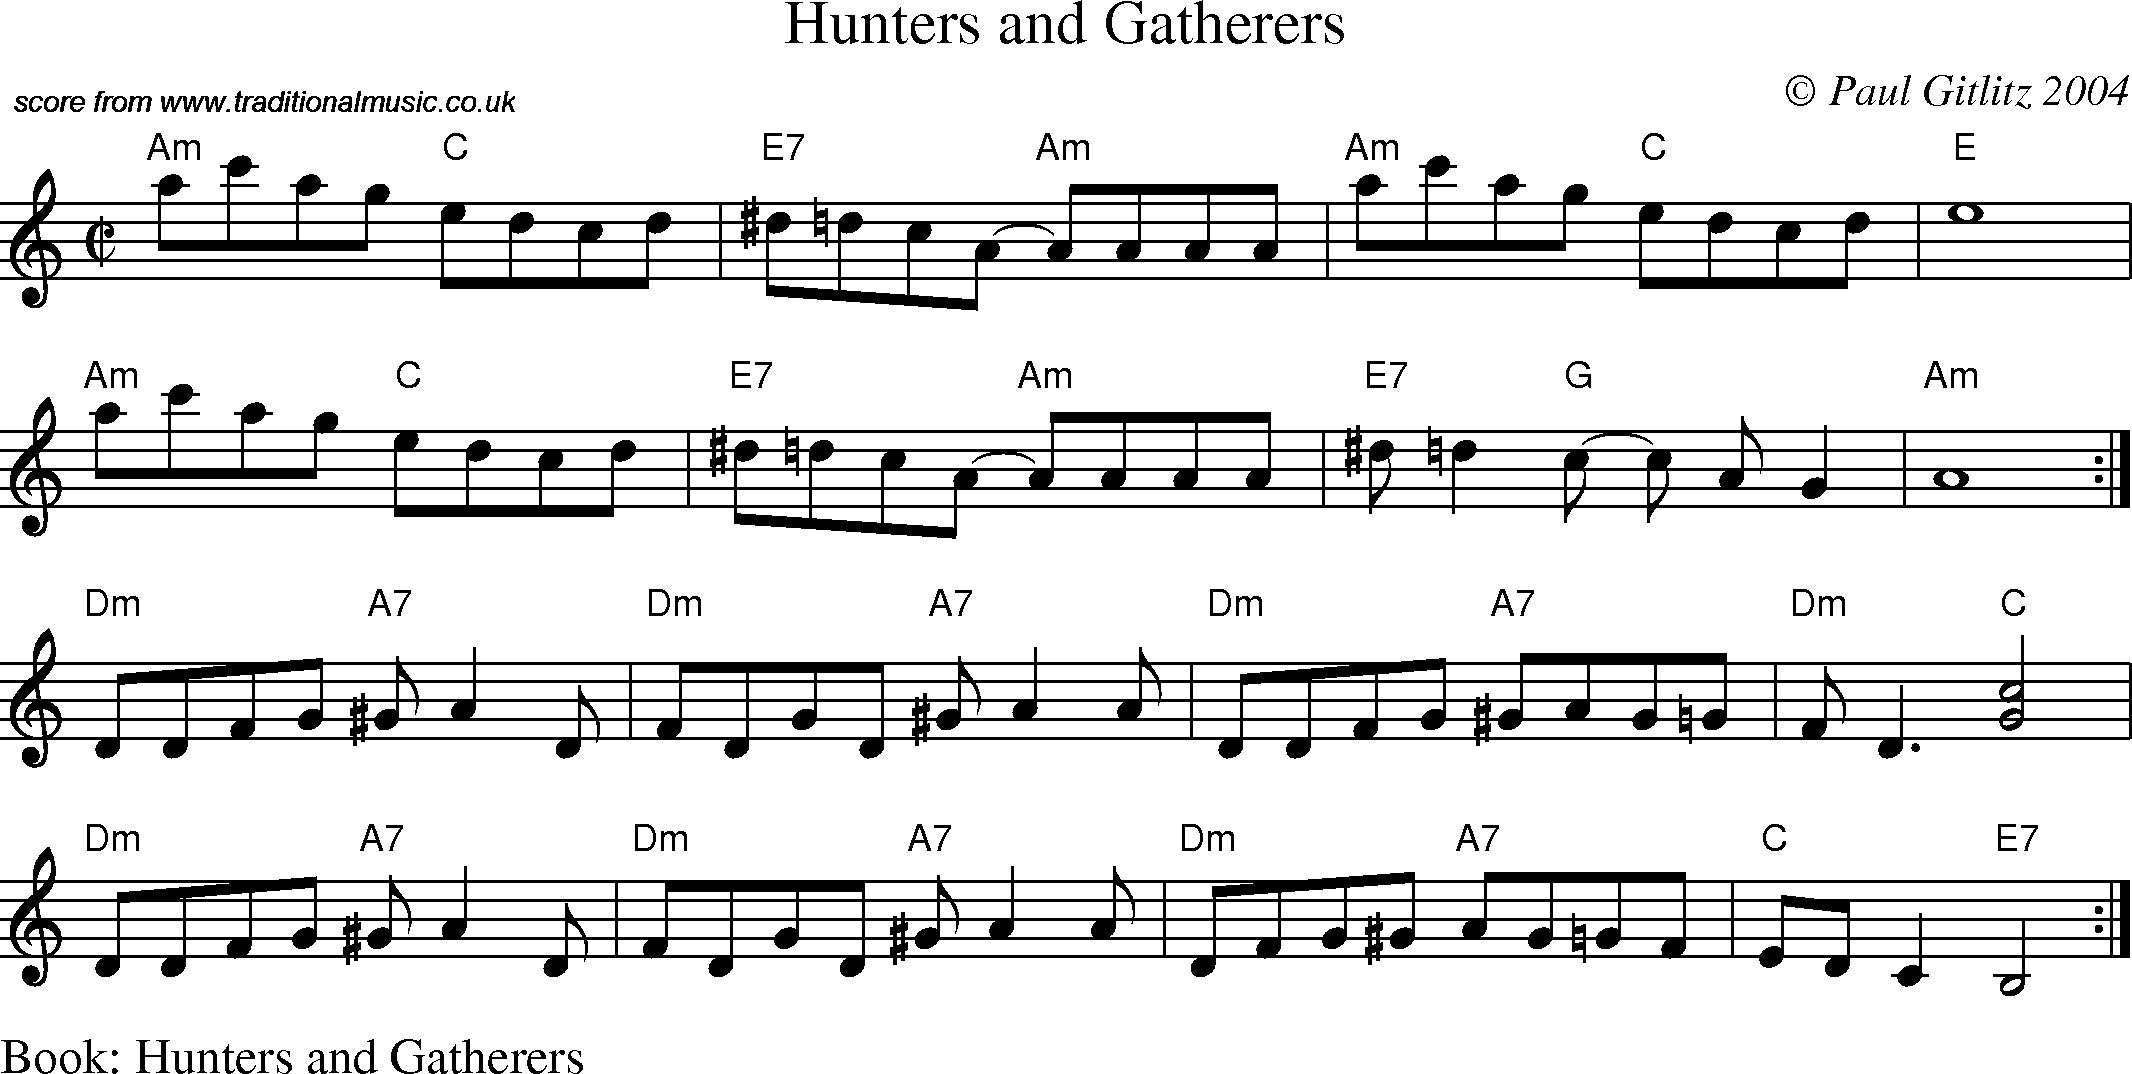 Sheet Music Score for Swing - Hunters and Gatherers